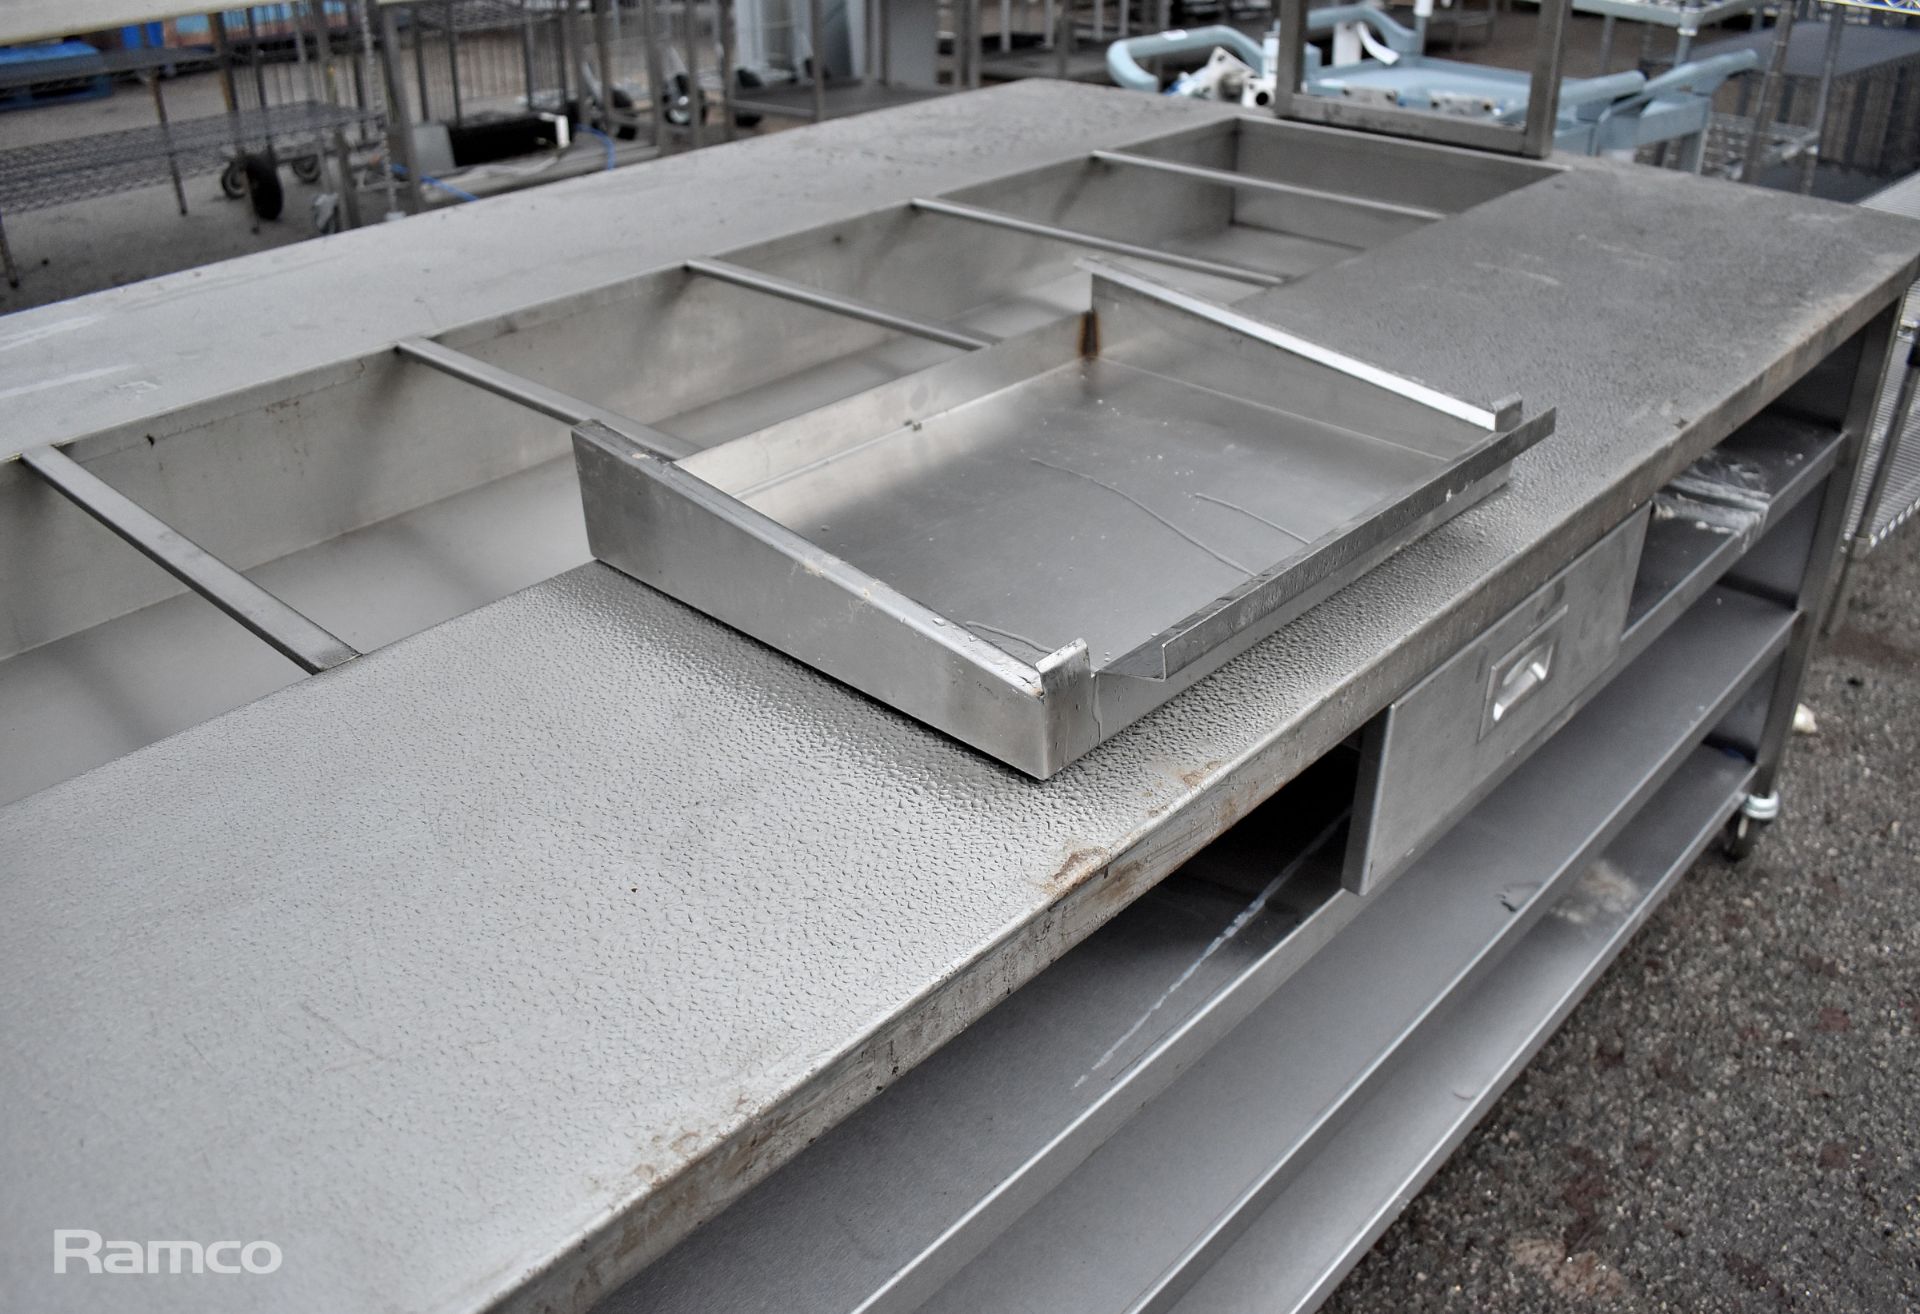 Stainless steel Prep station/Service station - L210 x W140 x H200 approximately - Image 4 of 7